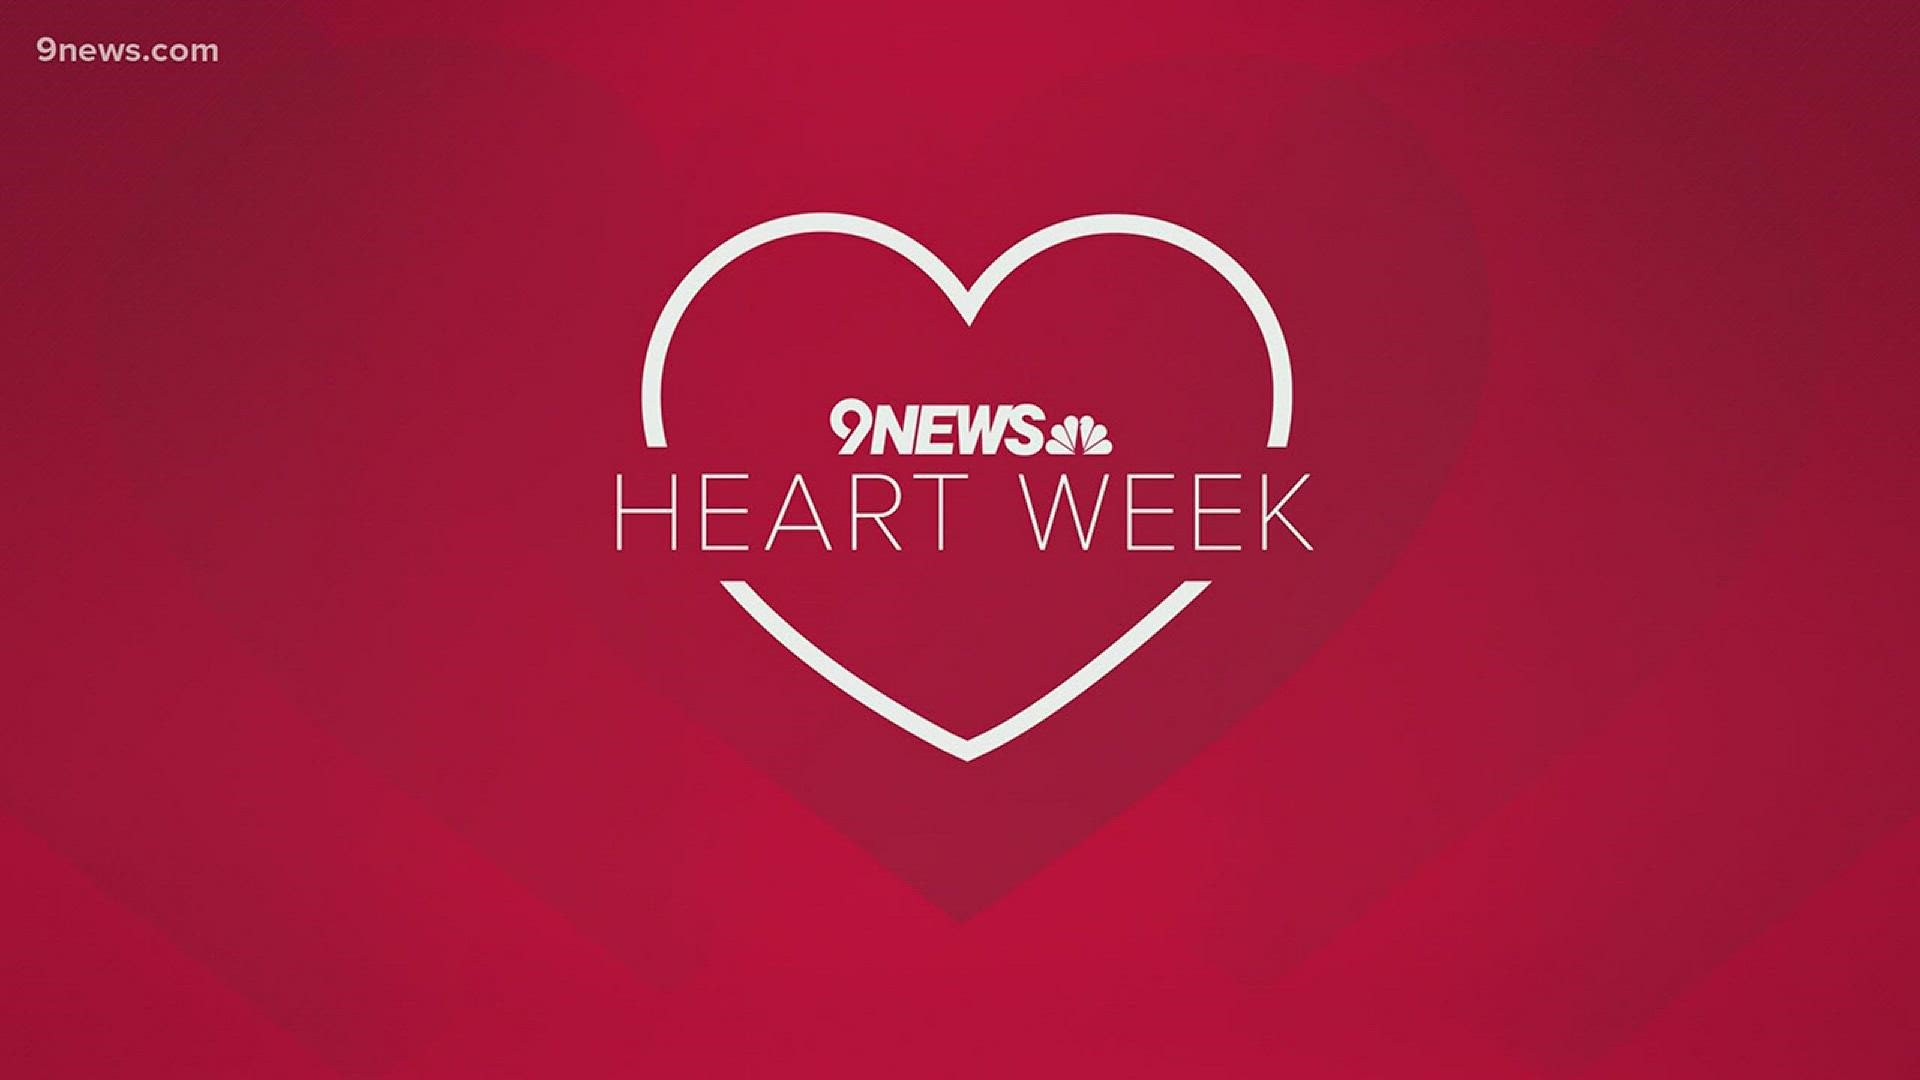 We are wrapping up 9NEWS Heart Week by focusing on heart failure. Carol Beeley was 48 years old when her life changed drastically.  She had been feeling tired, was short of breath then passed out at work.